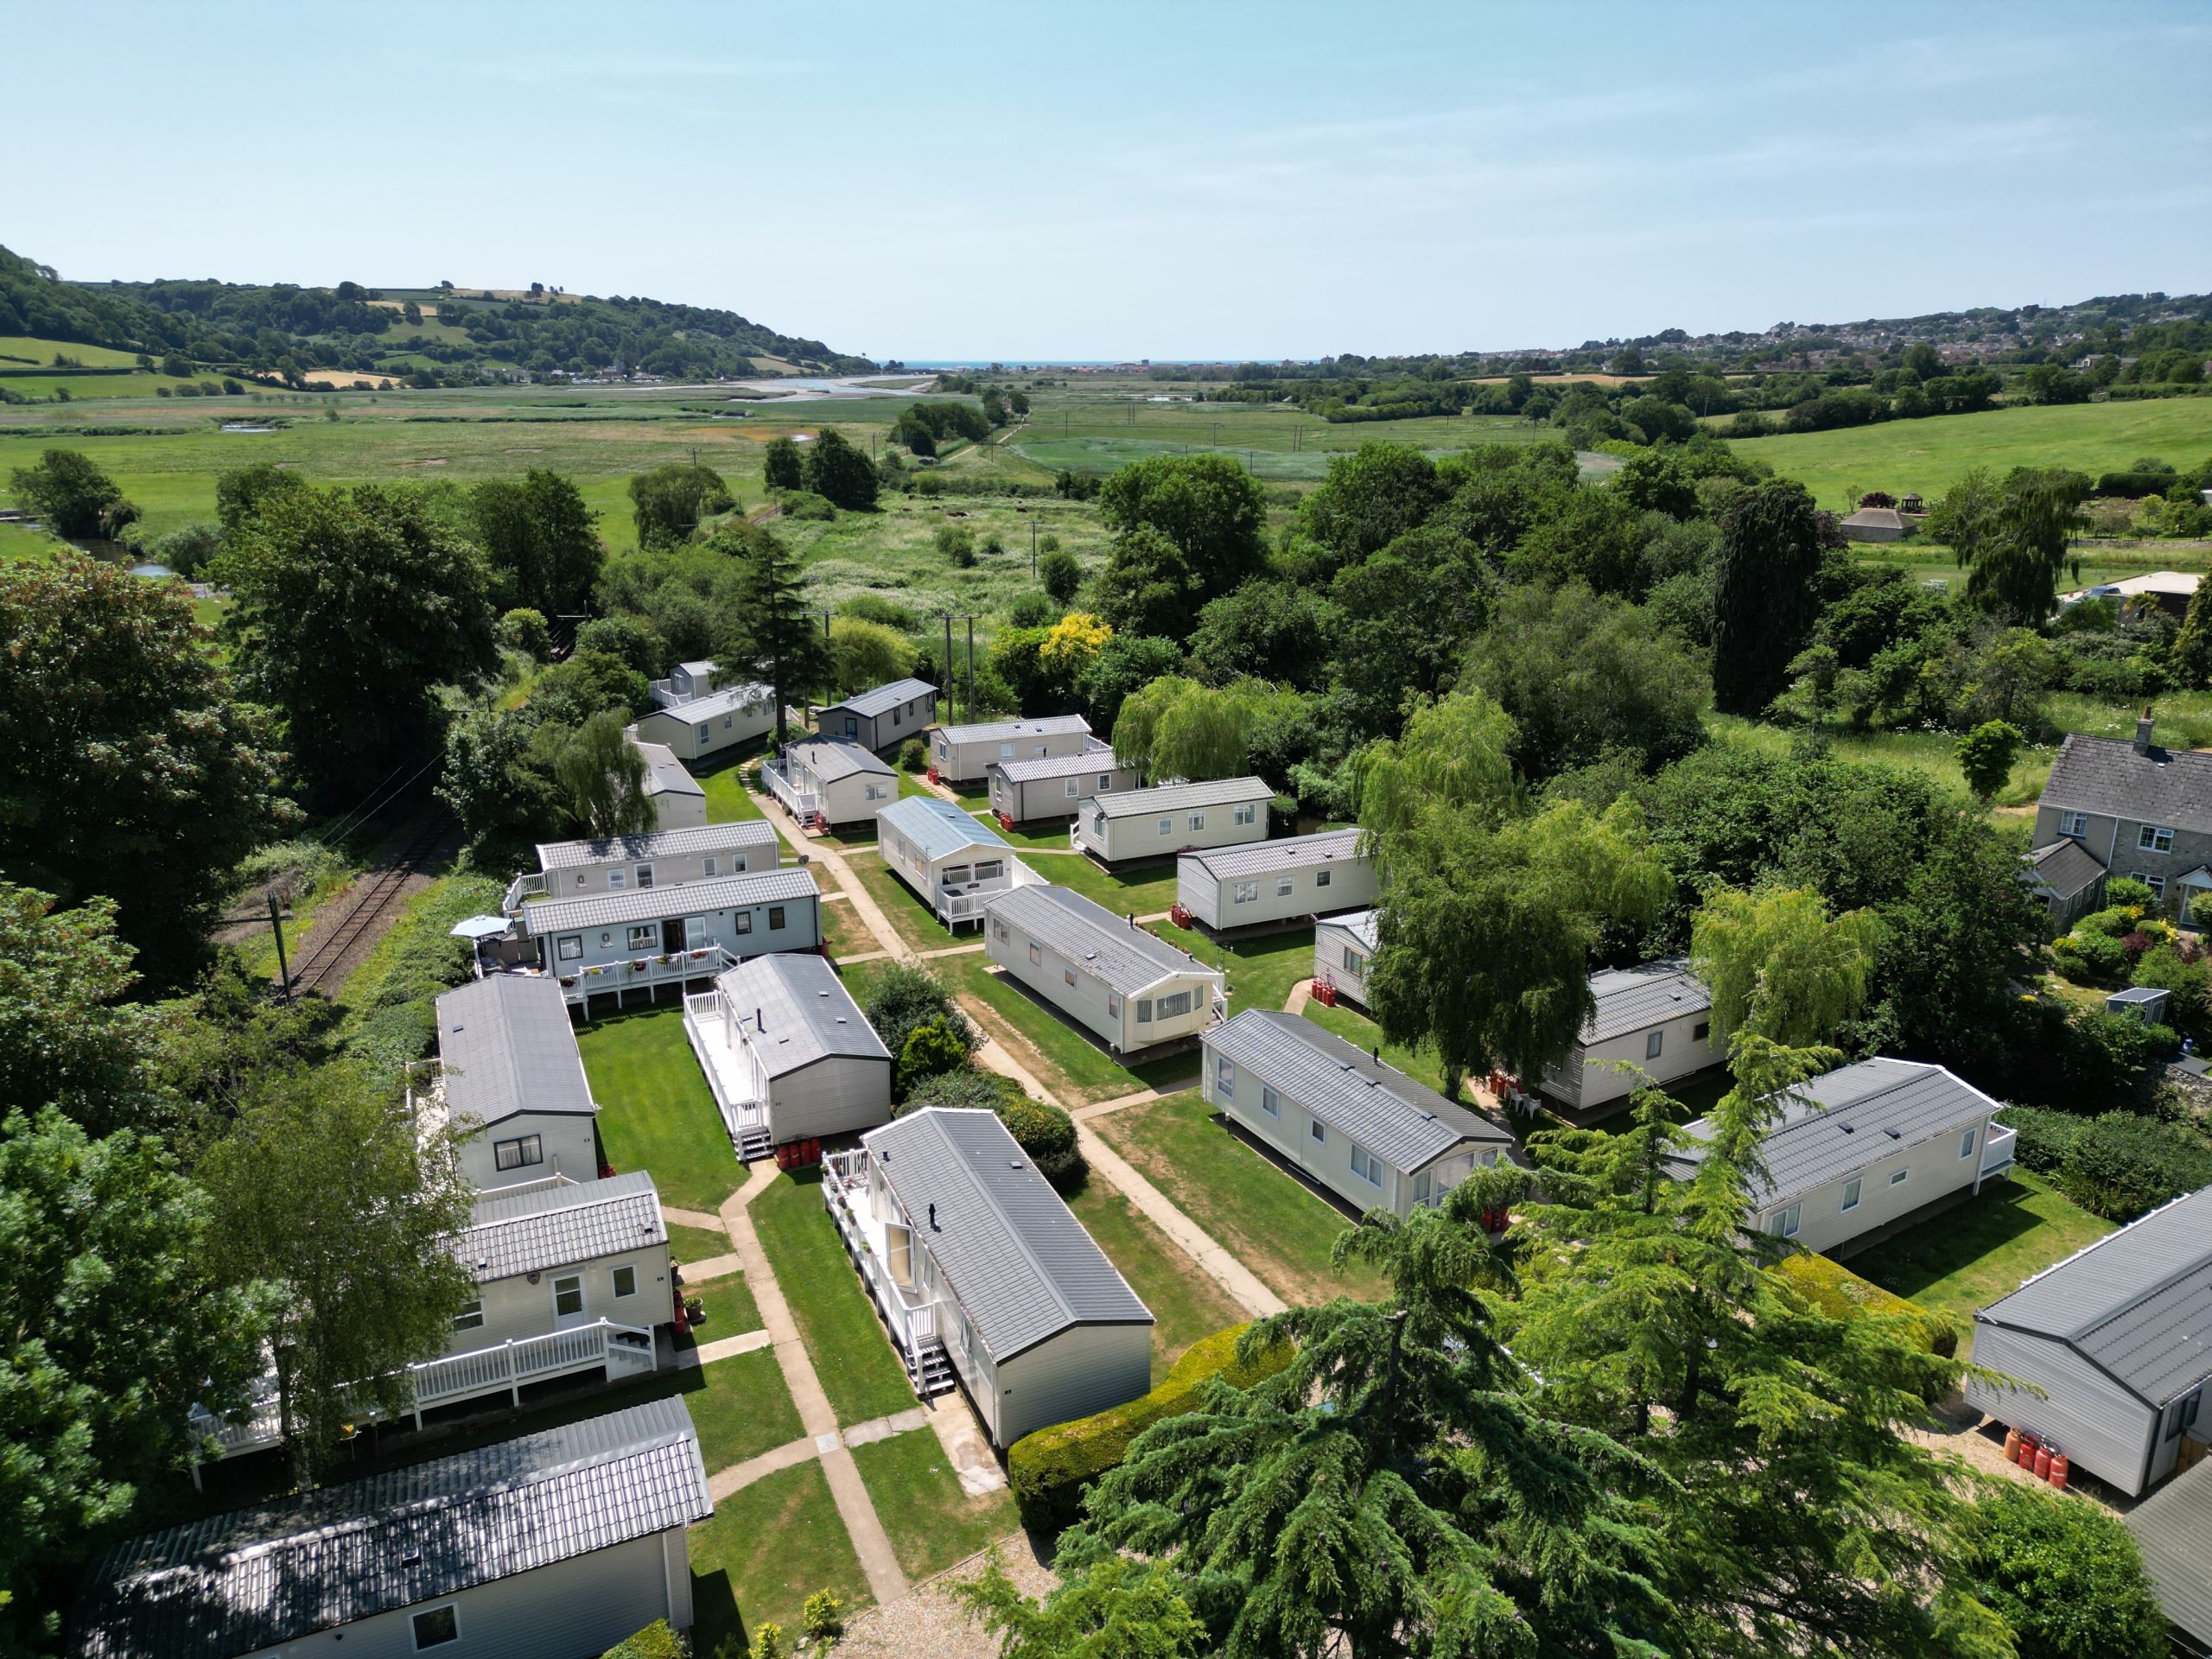 Coly Vale Holiday Park, Colyford, Devon